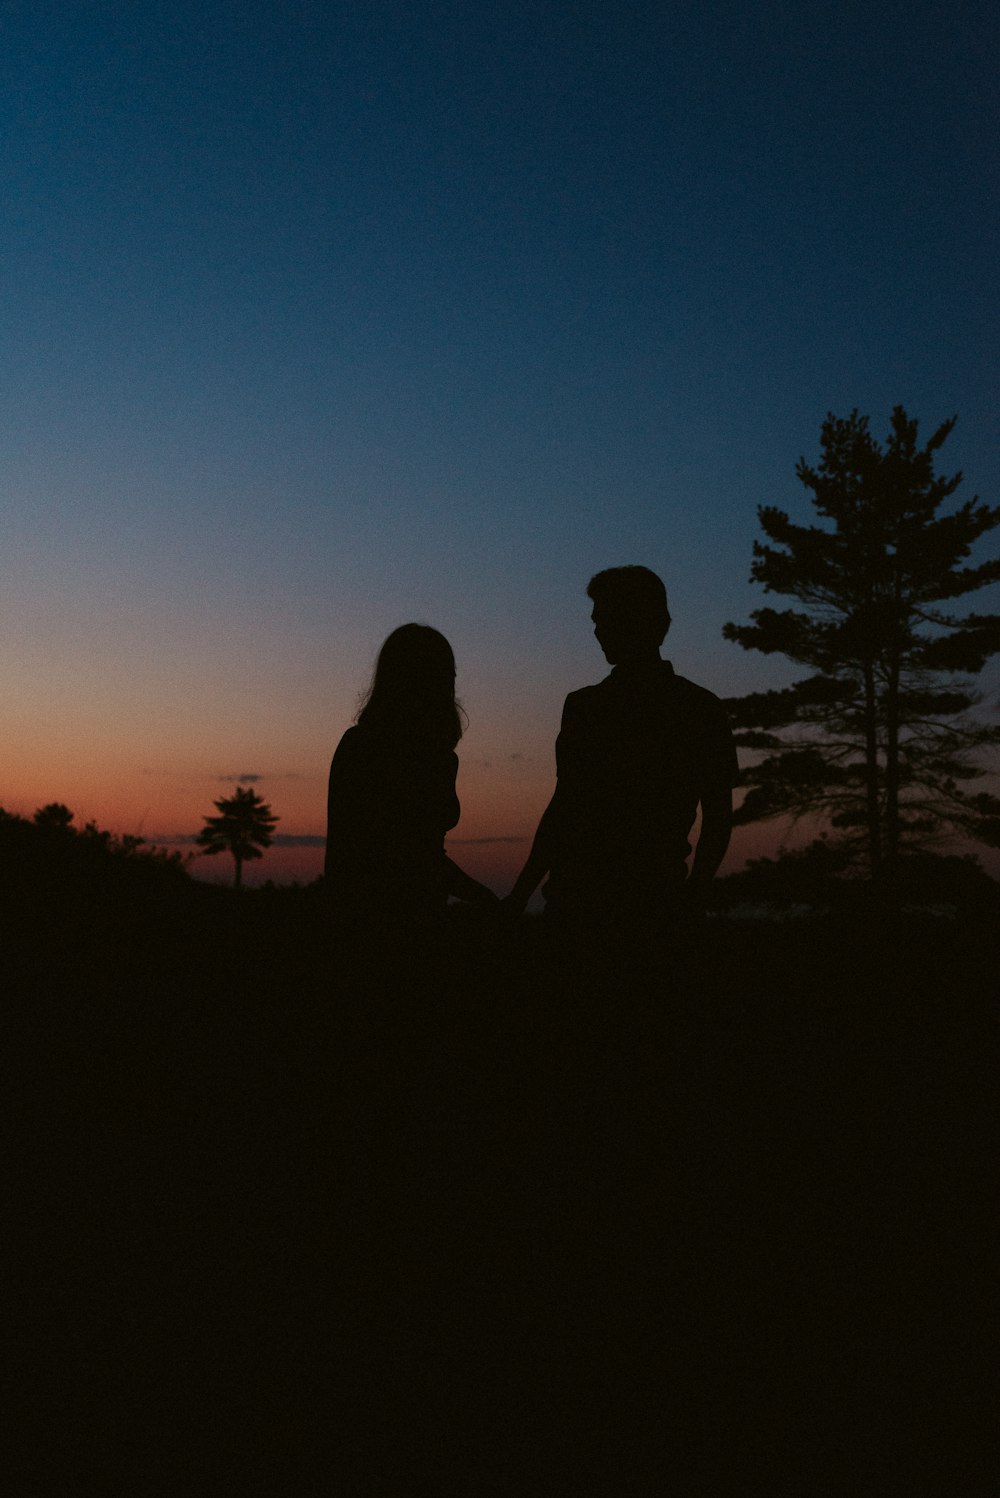 silhouette of 2 person standing near trees during sunset